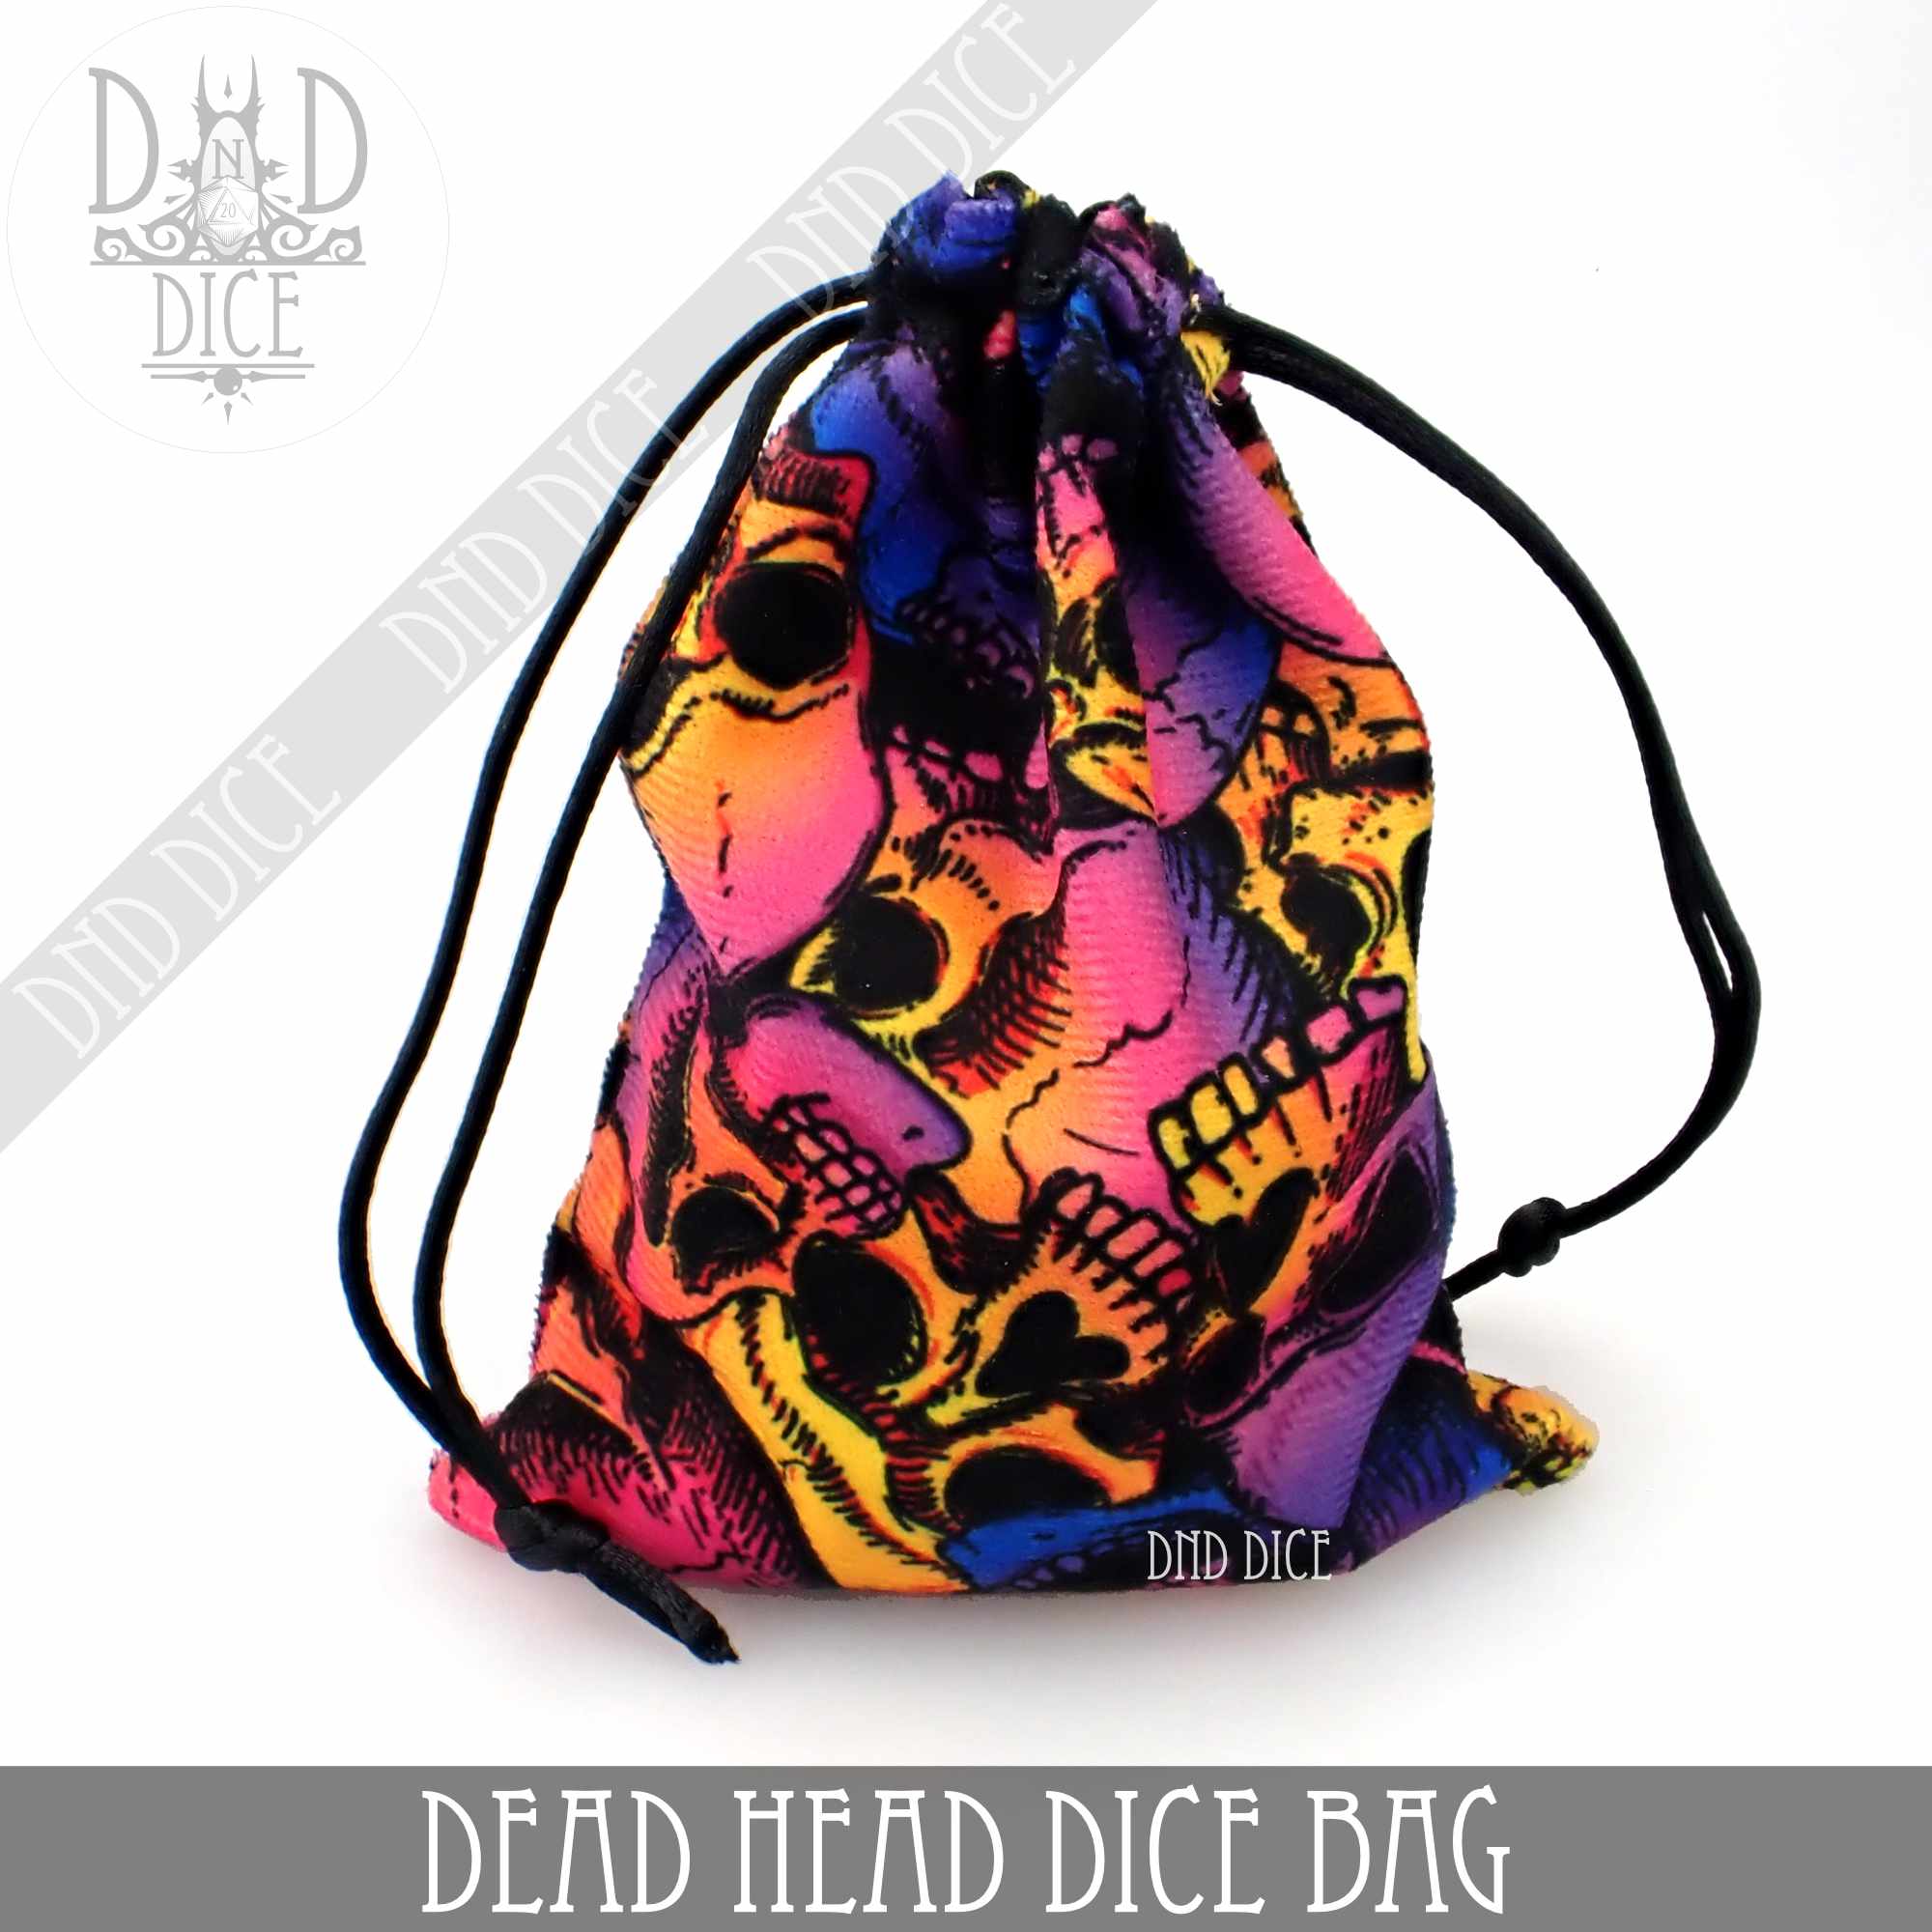 USA Gear Dungeons & Dragons Compact Travel Bag for India | Ubuy